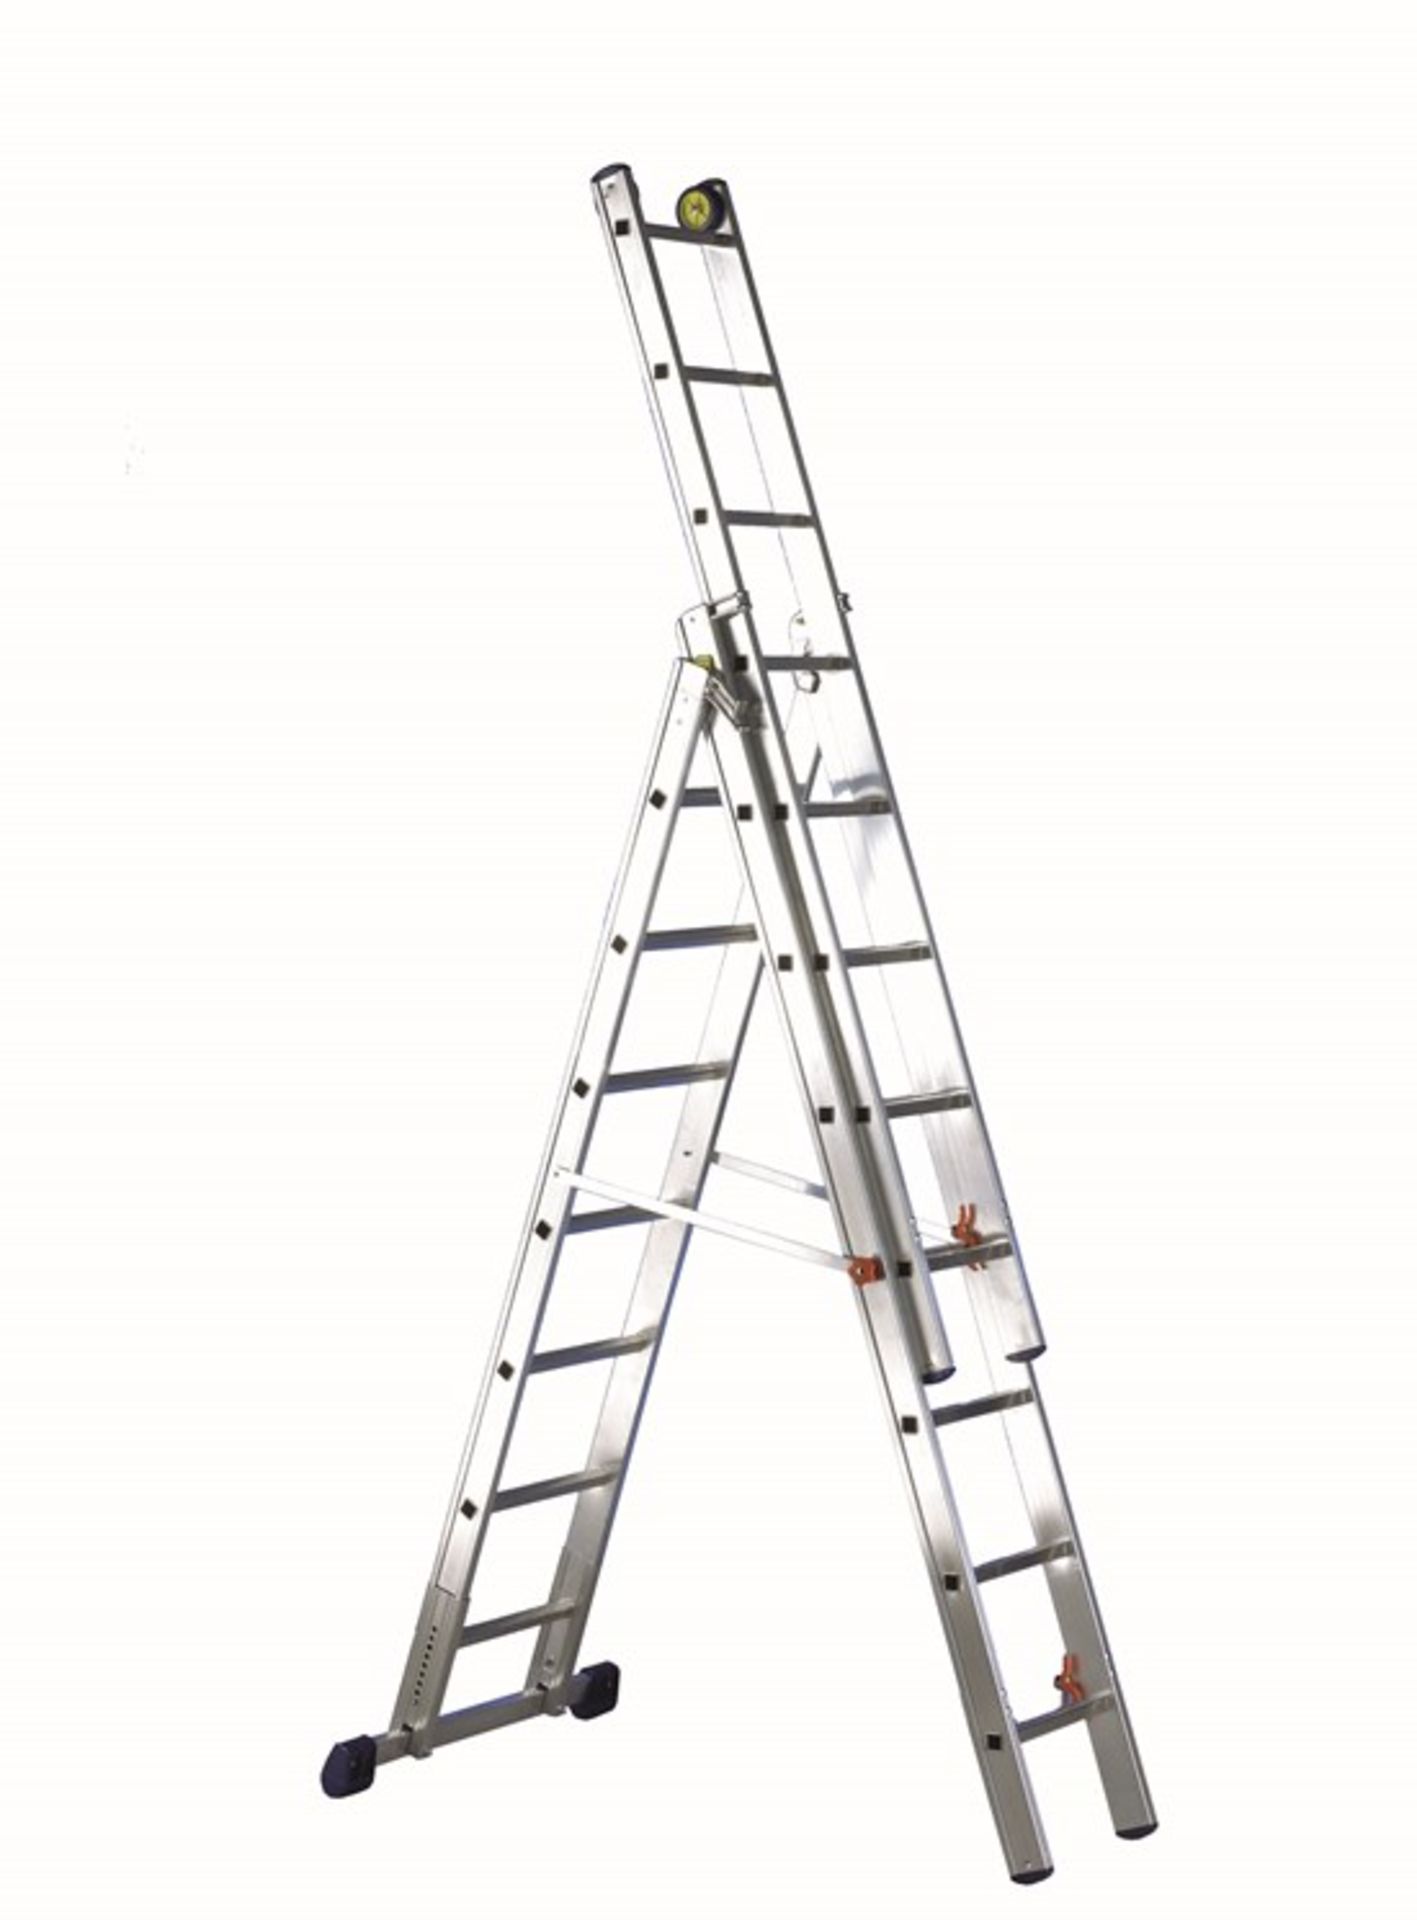 SVELT LUXE3 3-section push-up and A frame aluminium ladder 9+10+10 RUNGS EN131 150KG CAPACITY RRP £